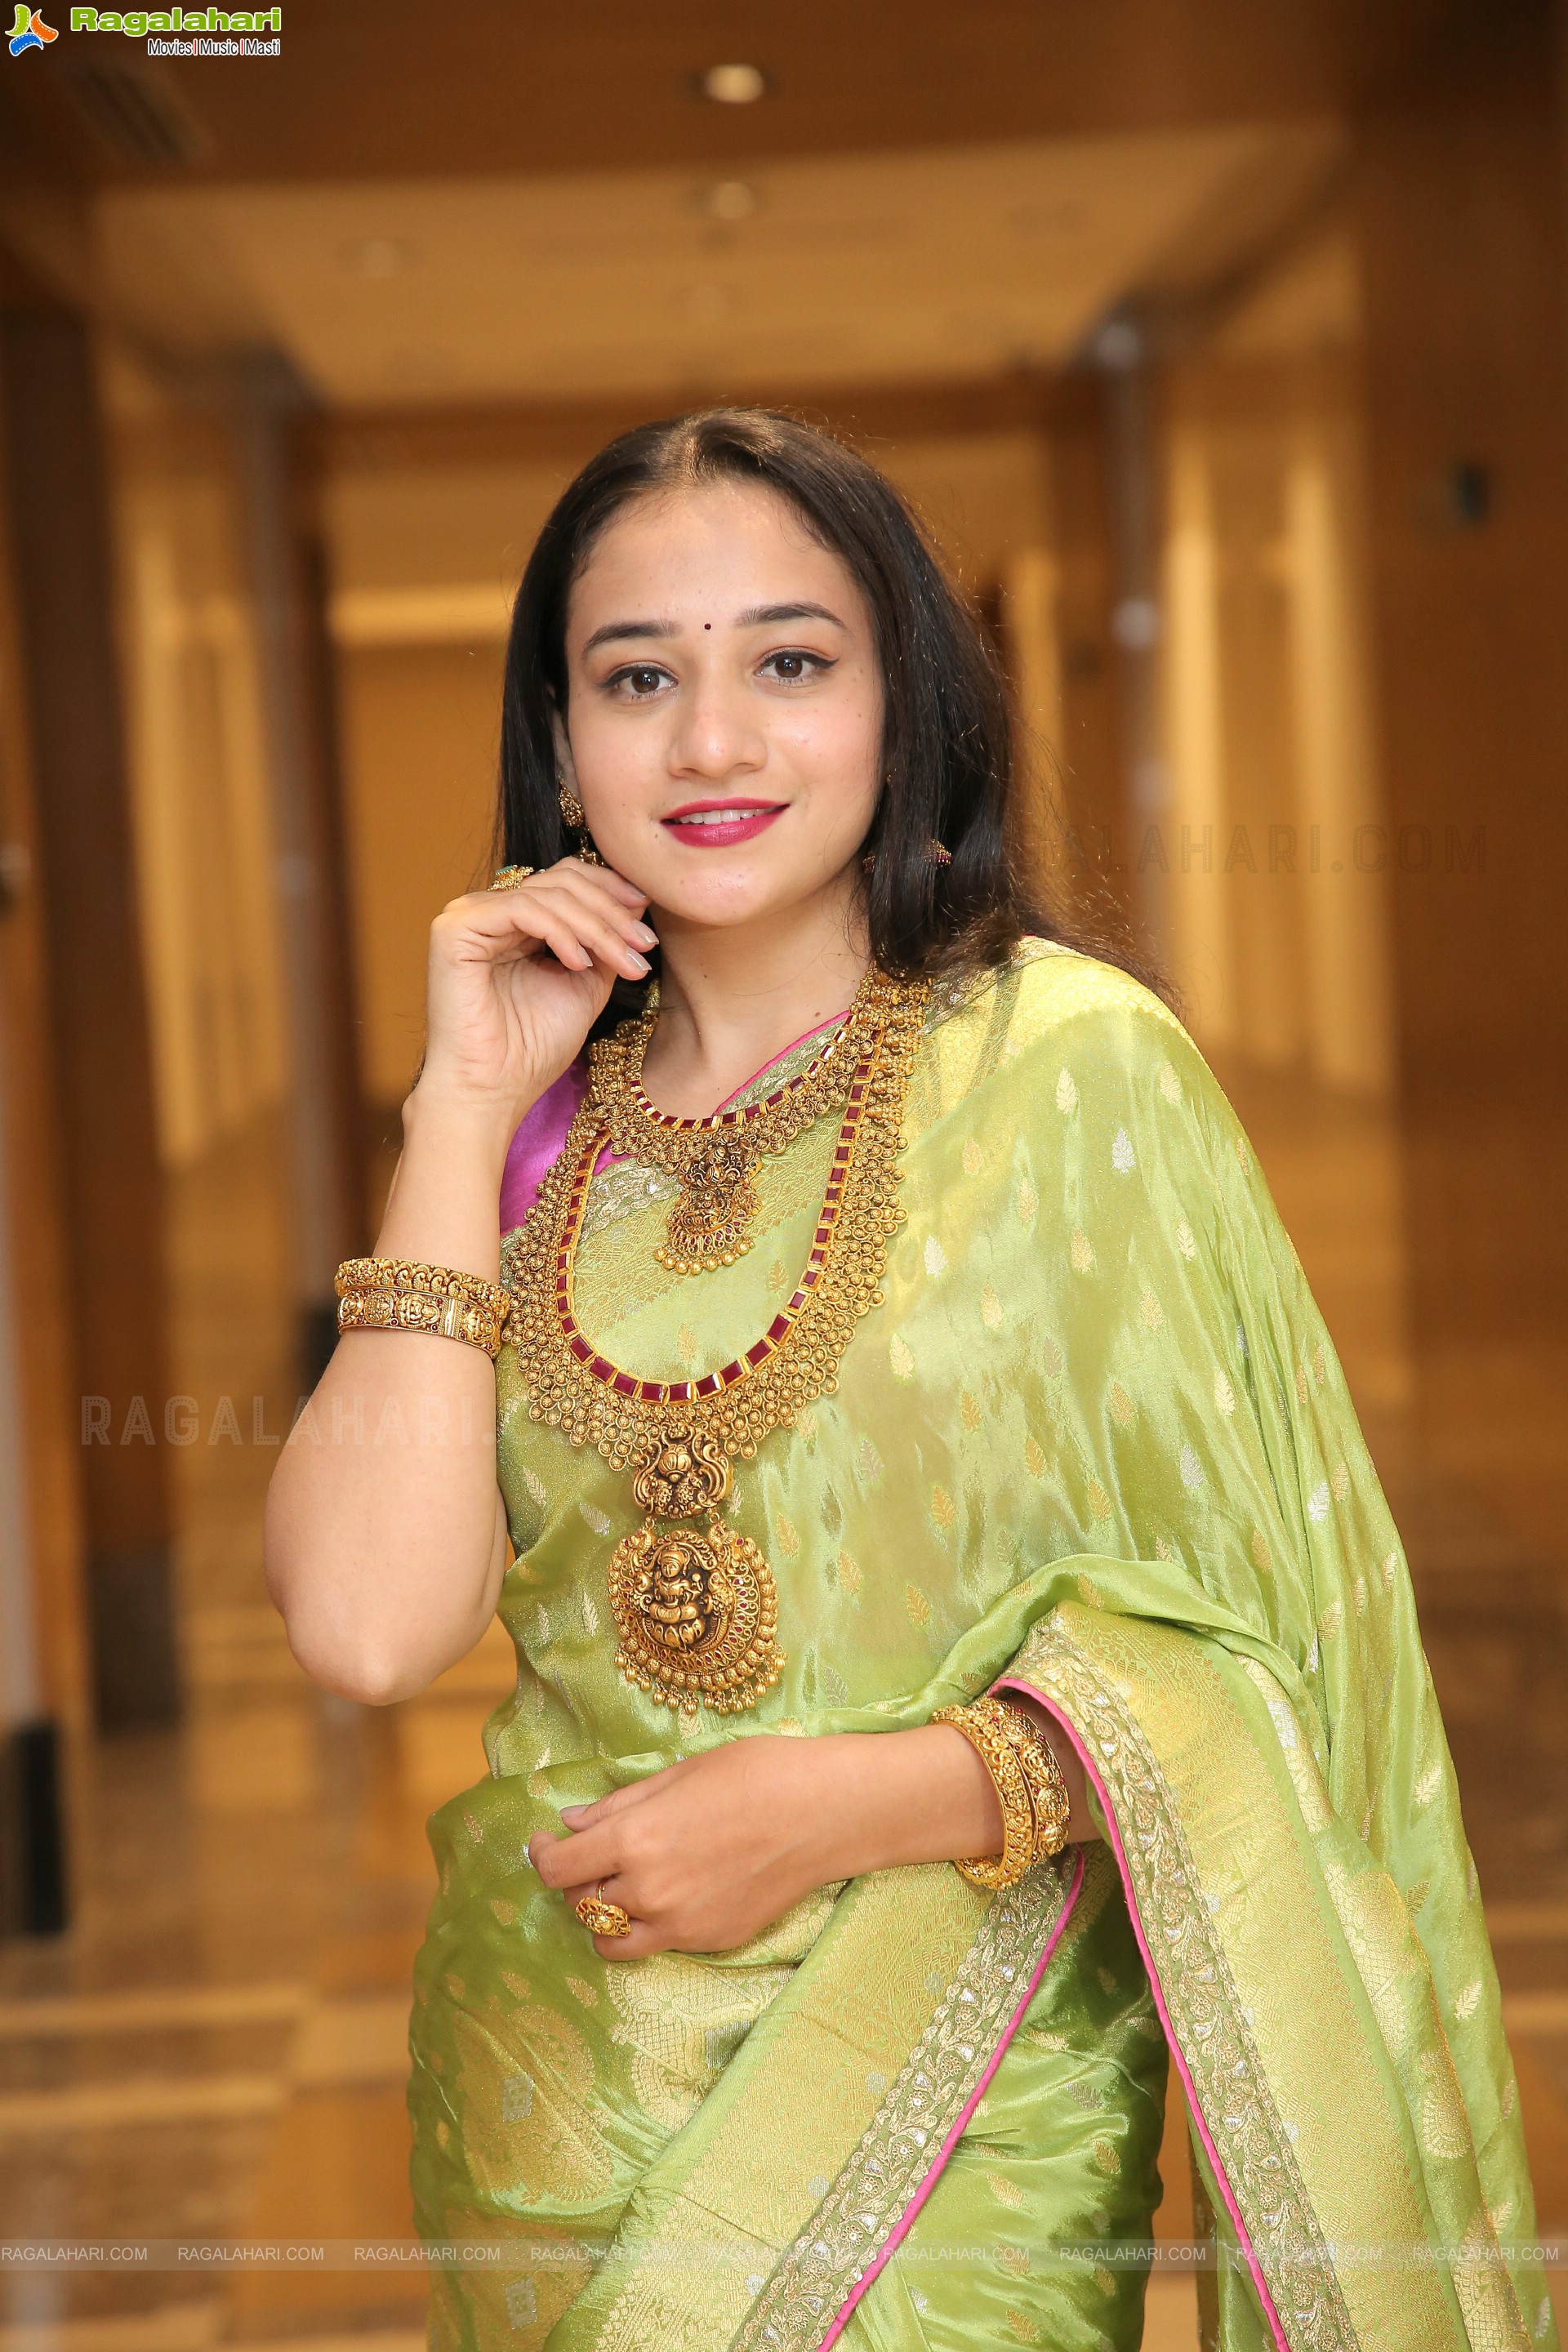 Bhuvaneshwari Showcases a Collection By Manepally Jewellers, HD Photo Gallery